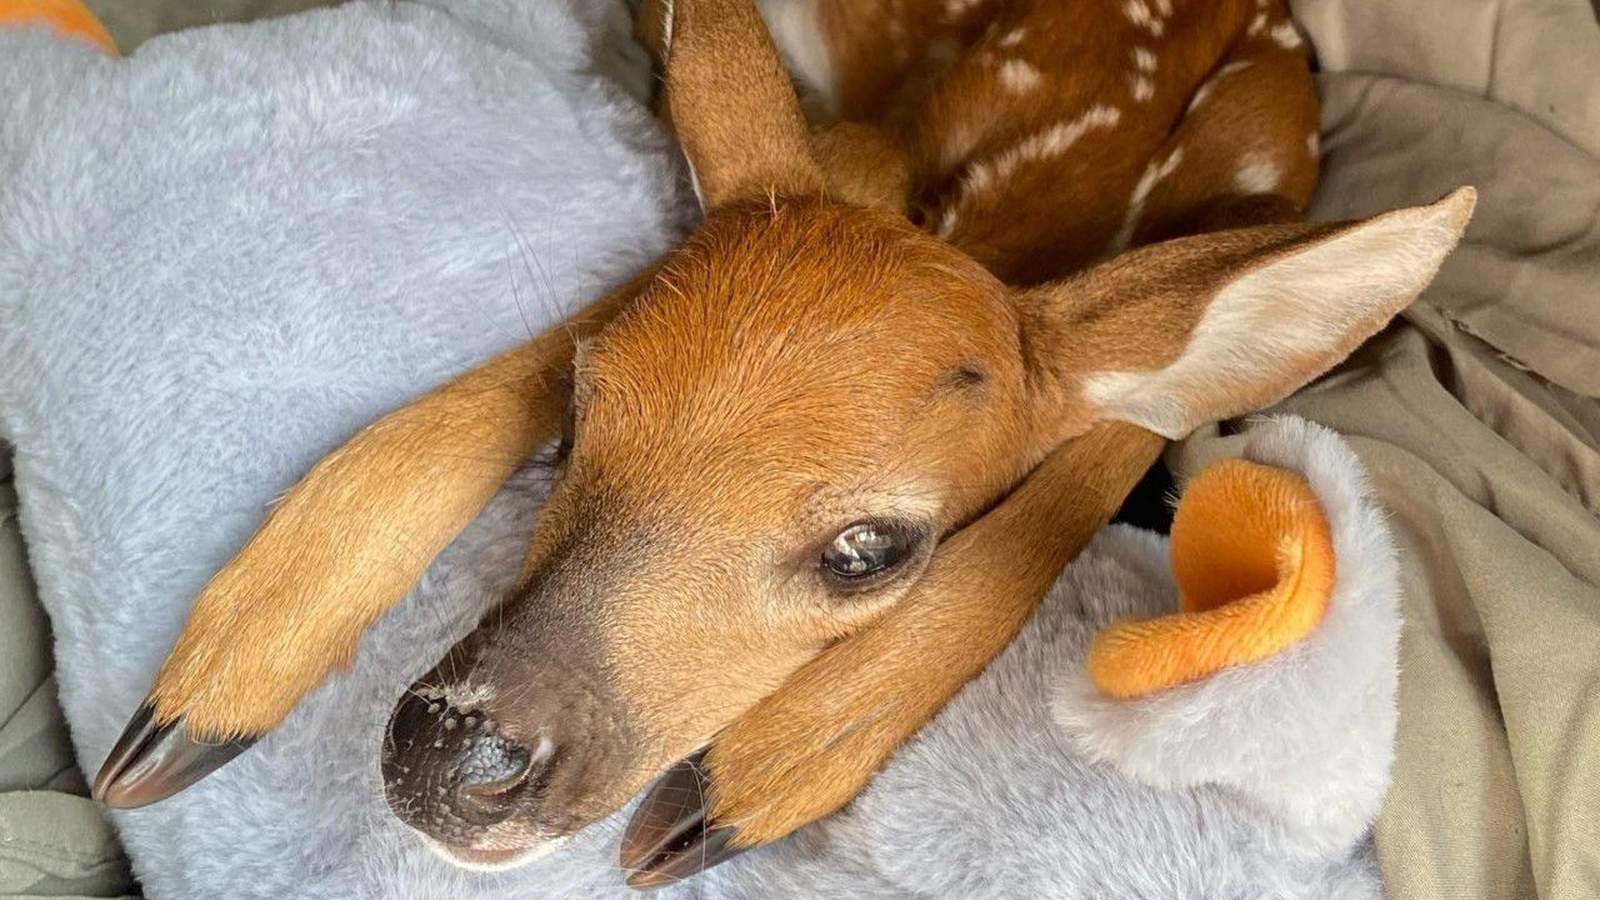 Baby deer found lying next to dead mother rescued in Brevard County